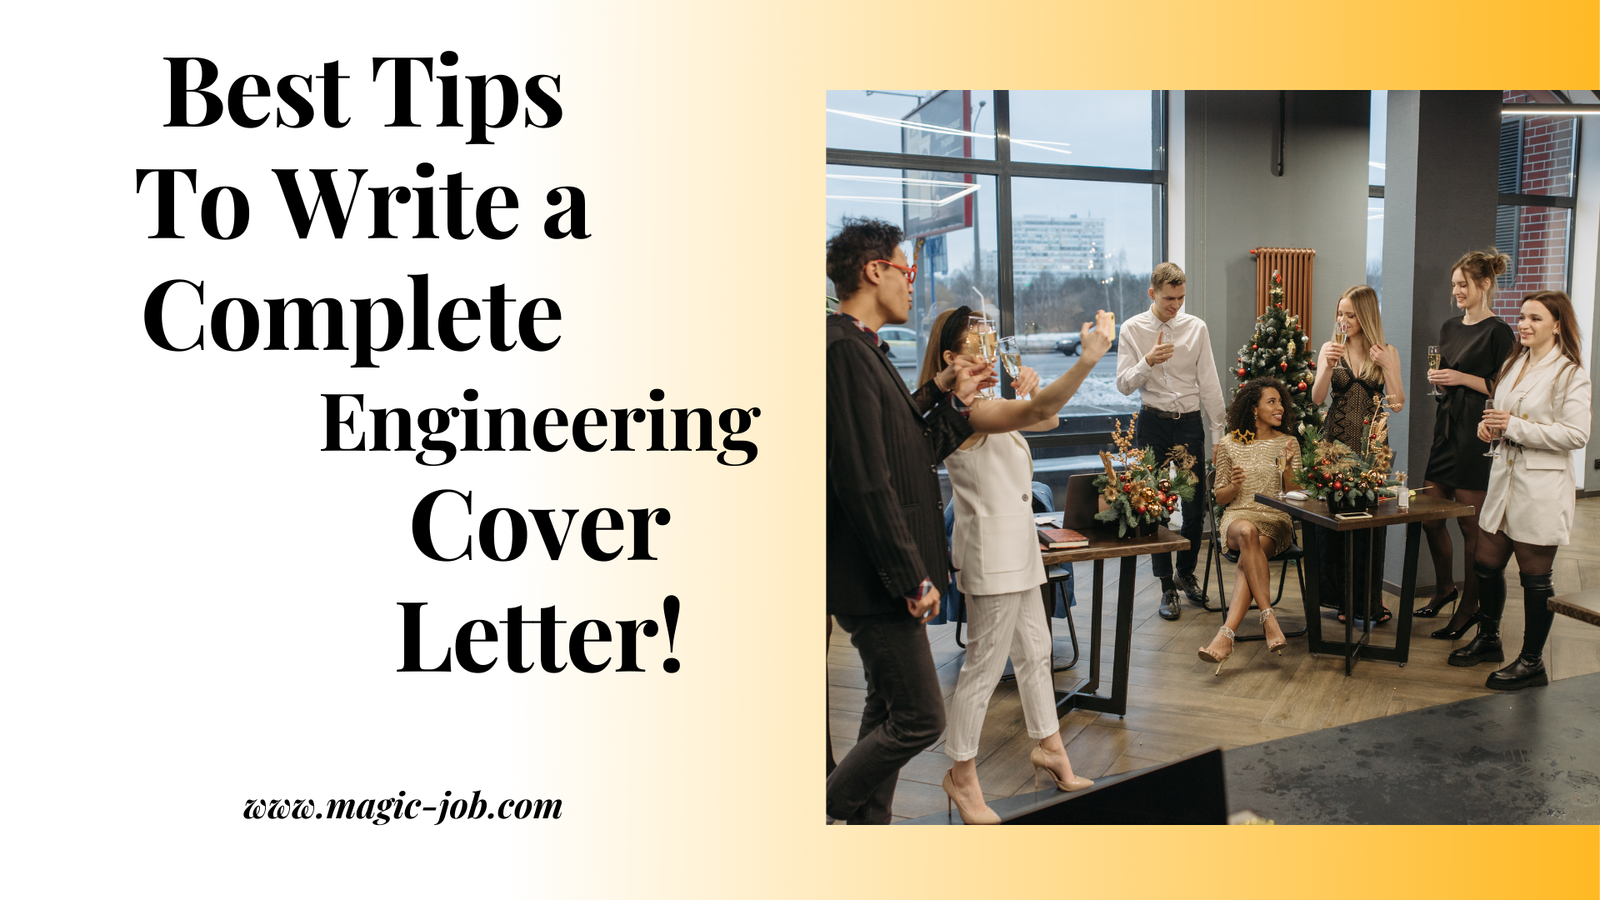 Best Tips to Write a Complete Engineering Cover Letter! image